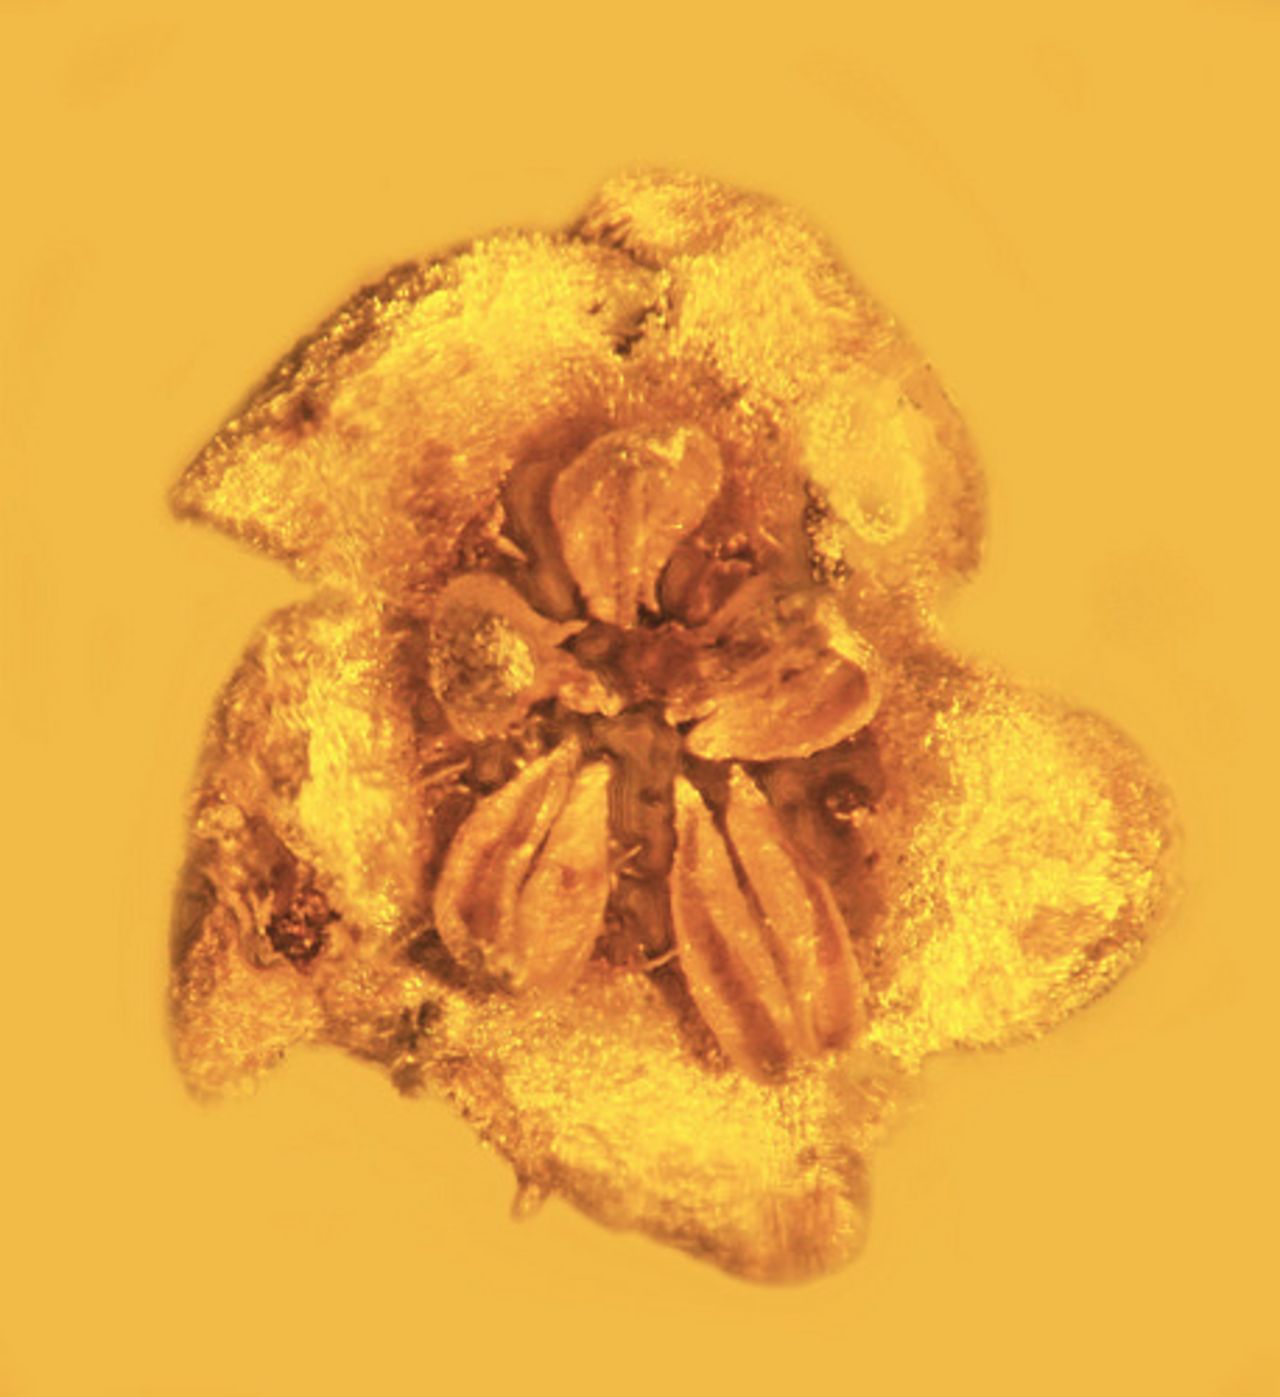 This blossom suspended in amber 15-30 million years ago is a new species discovery, Strychnos electri. It is likely highly poisonous.